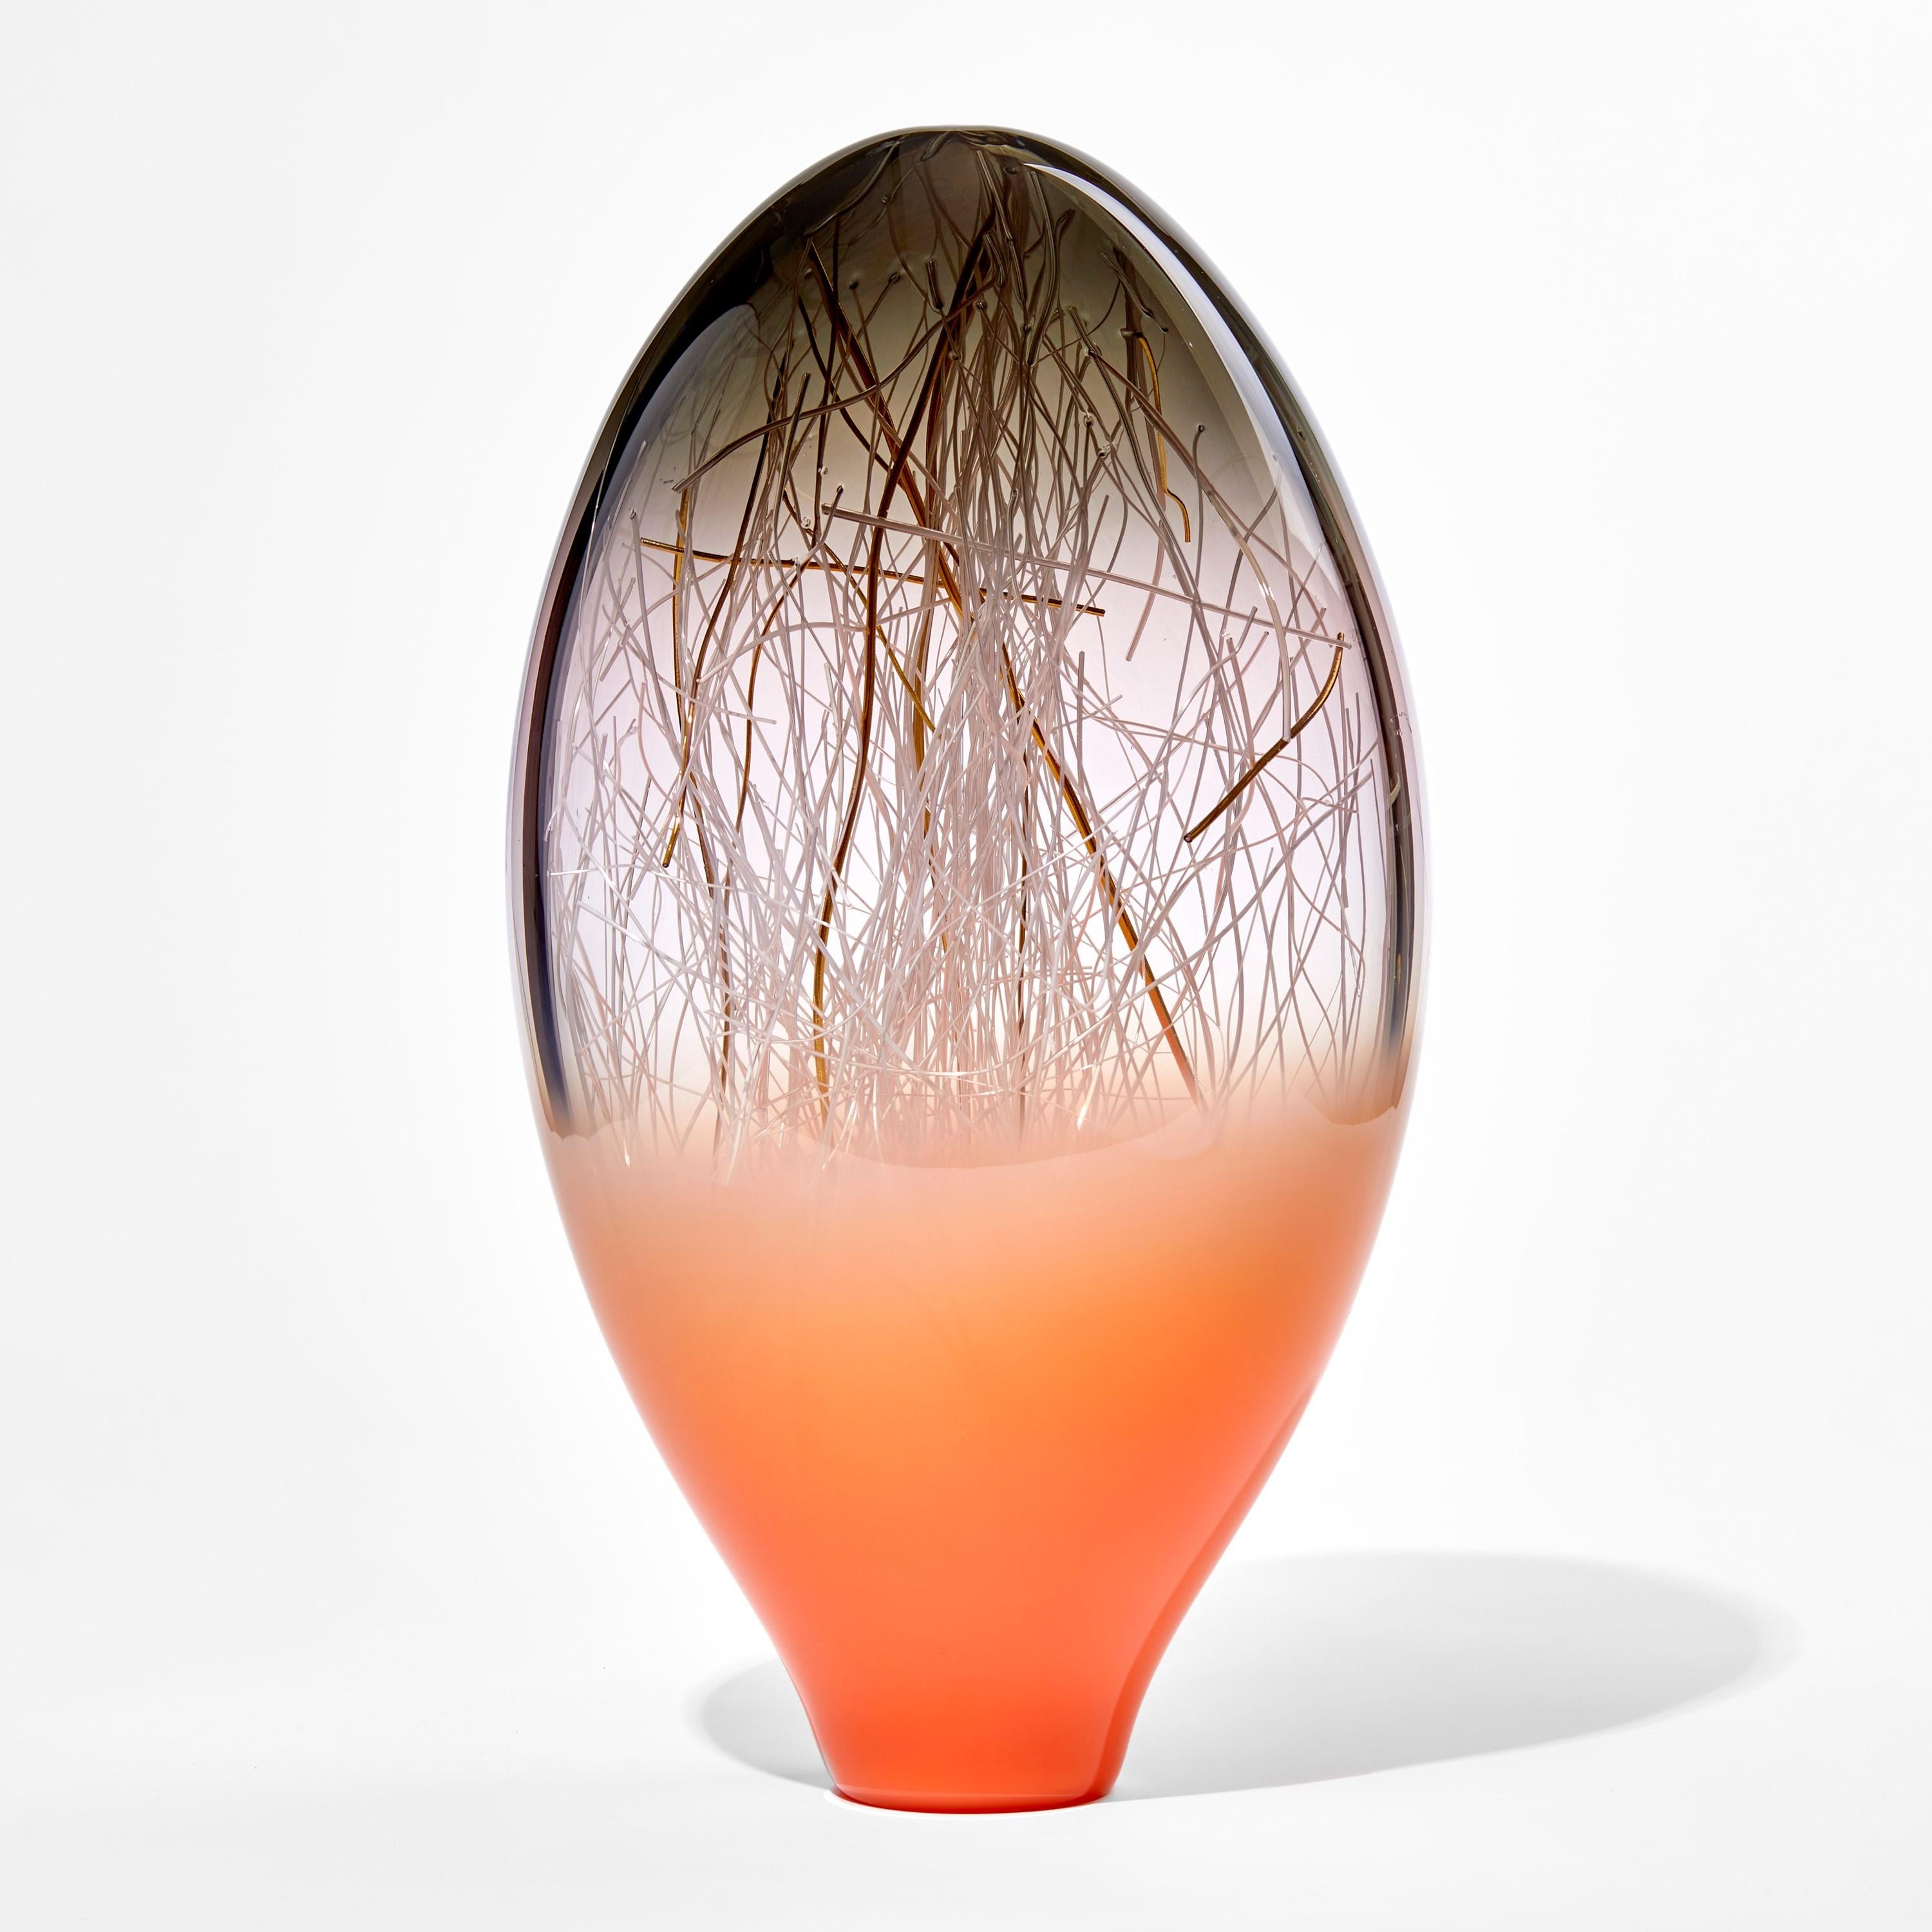 Ore in Salmon & Grey is a unique glass sculpture in coral orange, grey and clear colored glass by the collaborative artists Hanne Enemark (Danish) and Louis Thompson (British). The outer glass form contains a multitude of fine white canes of glass,